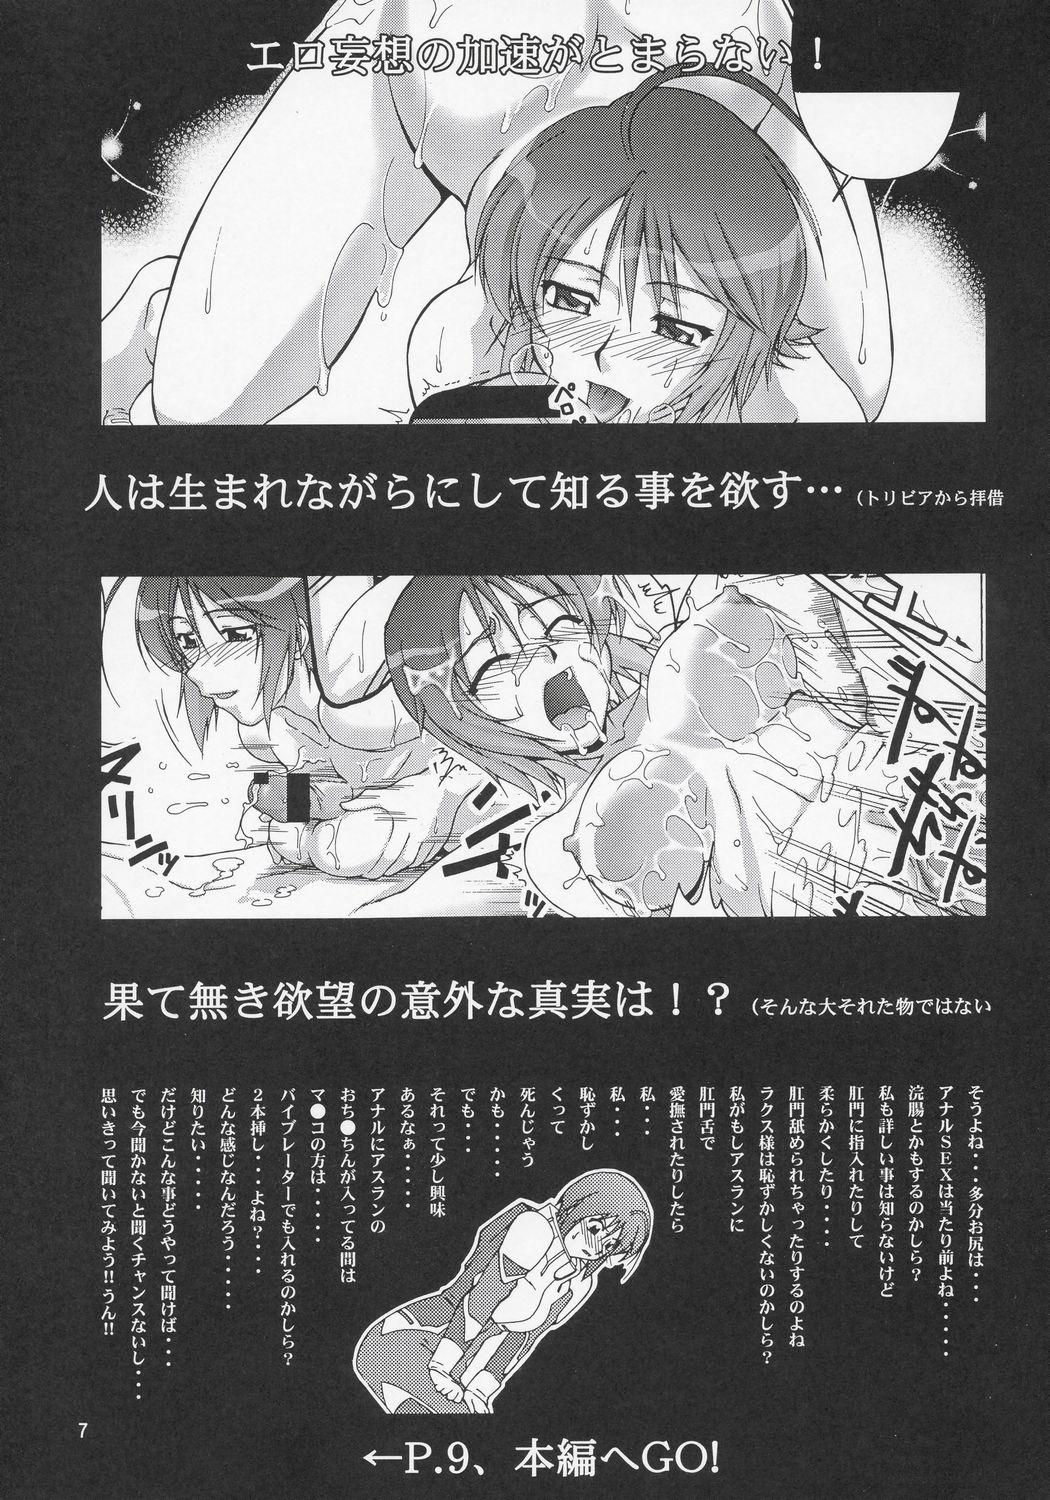 Big Dicks Thank You! Lacus End - Gundam seed destiny From - Page 6